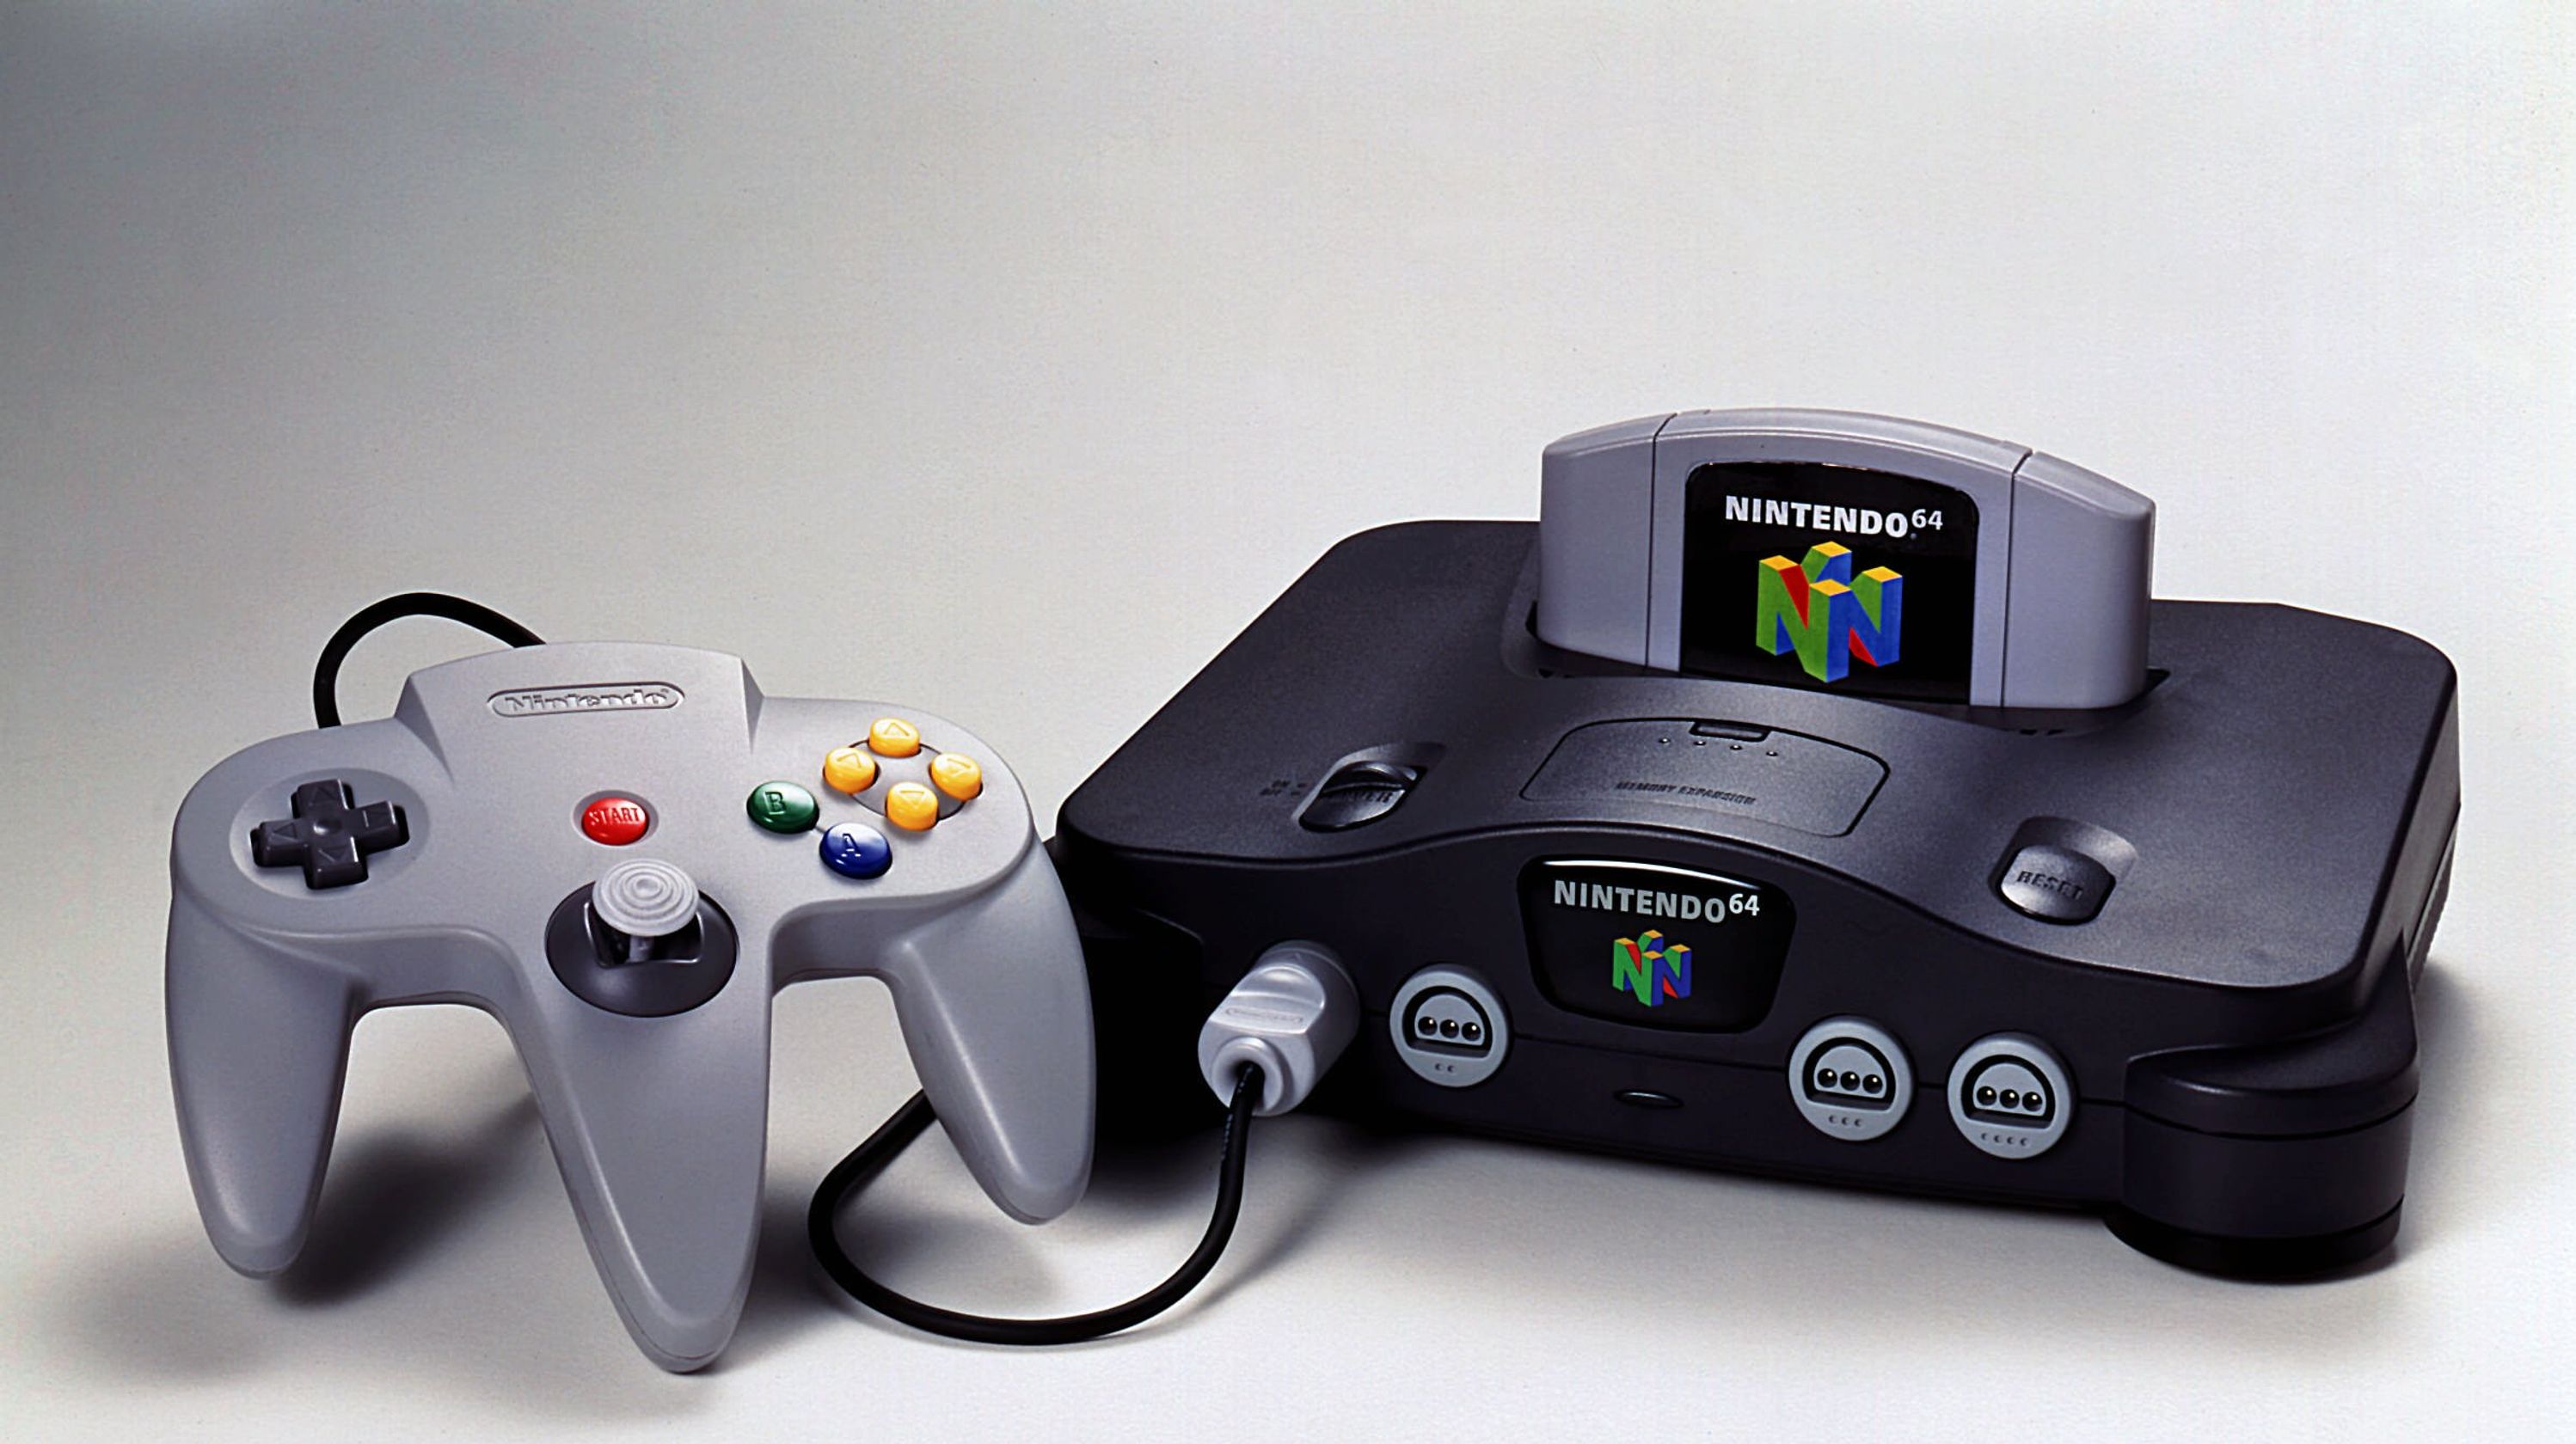 Bar kæde Advarsel The 25 best N64 games you need to revisit | VGC